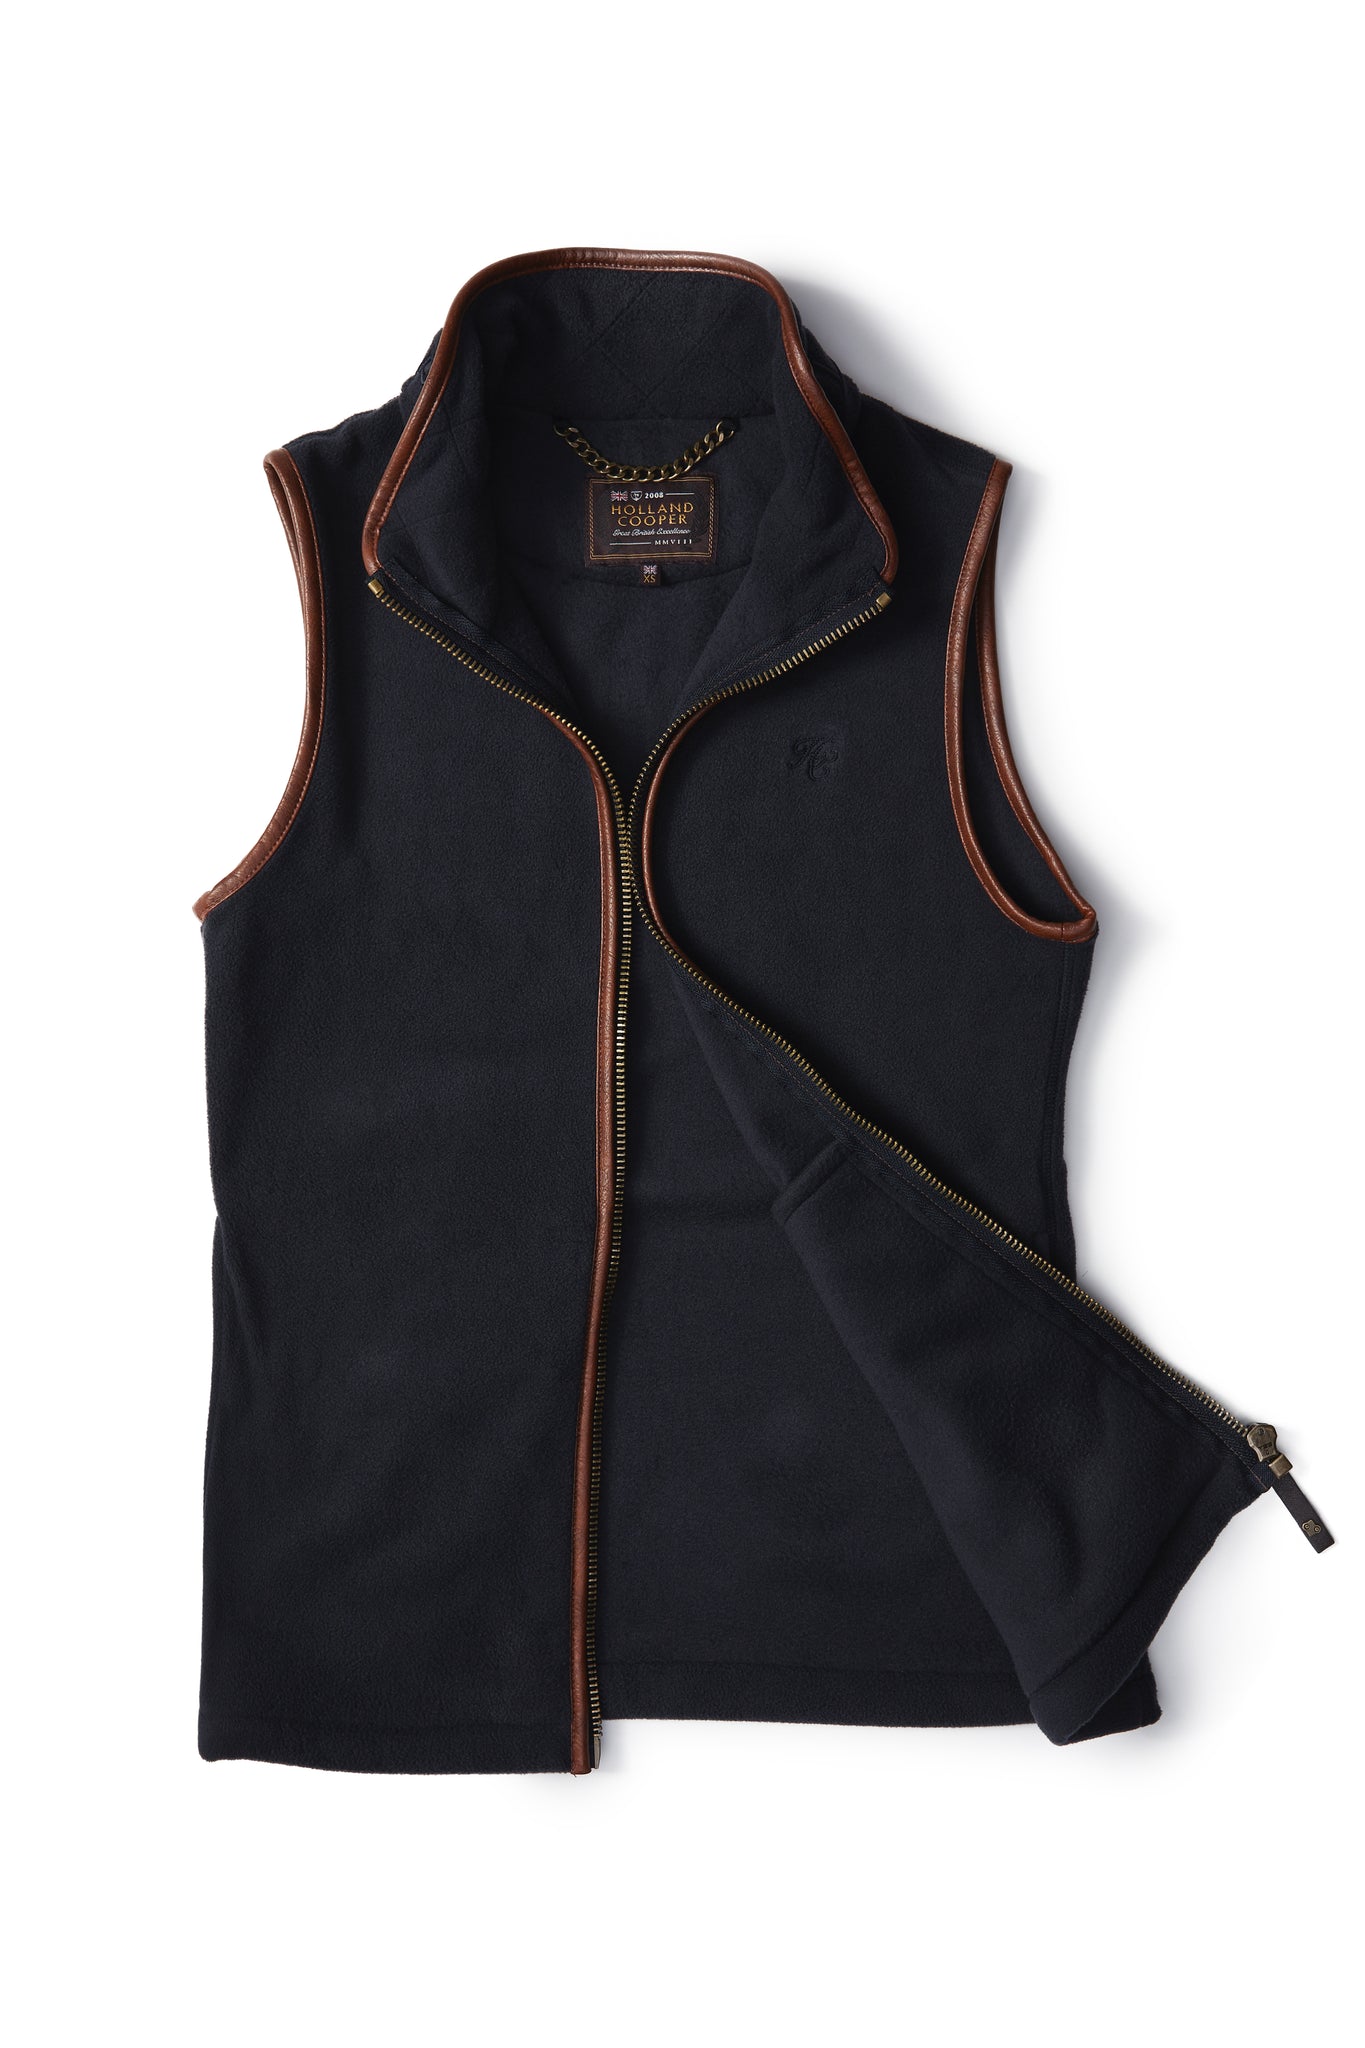 womens fleece gilet in navy with dark brown leather piping around armholes neckline and down the front zip fastening